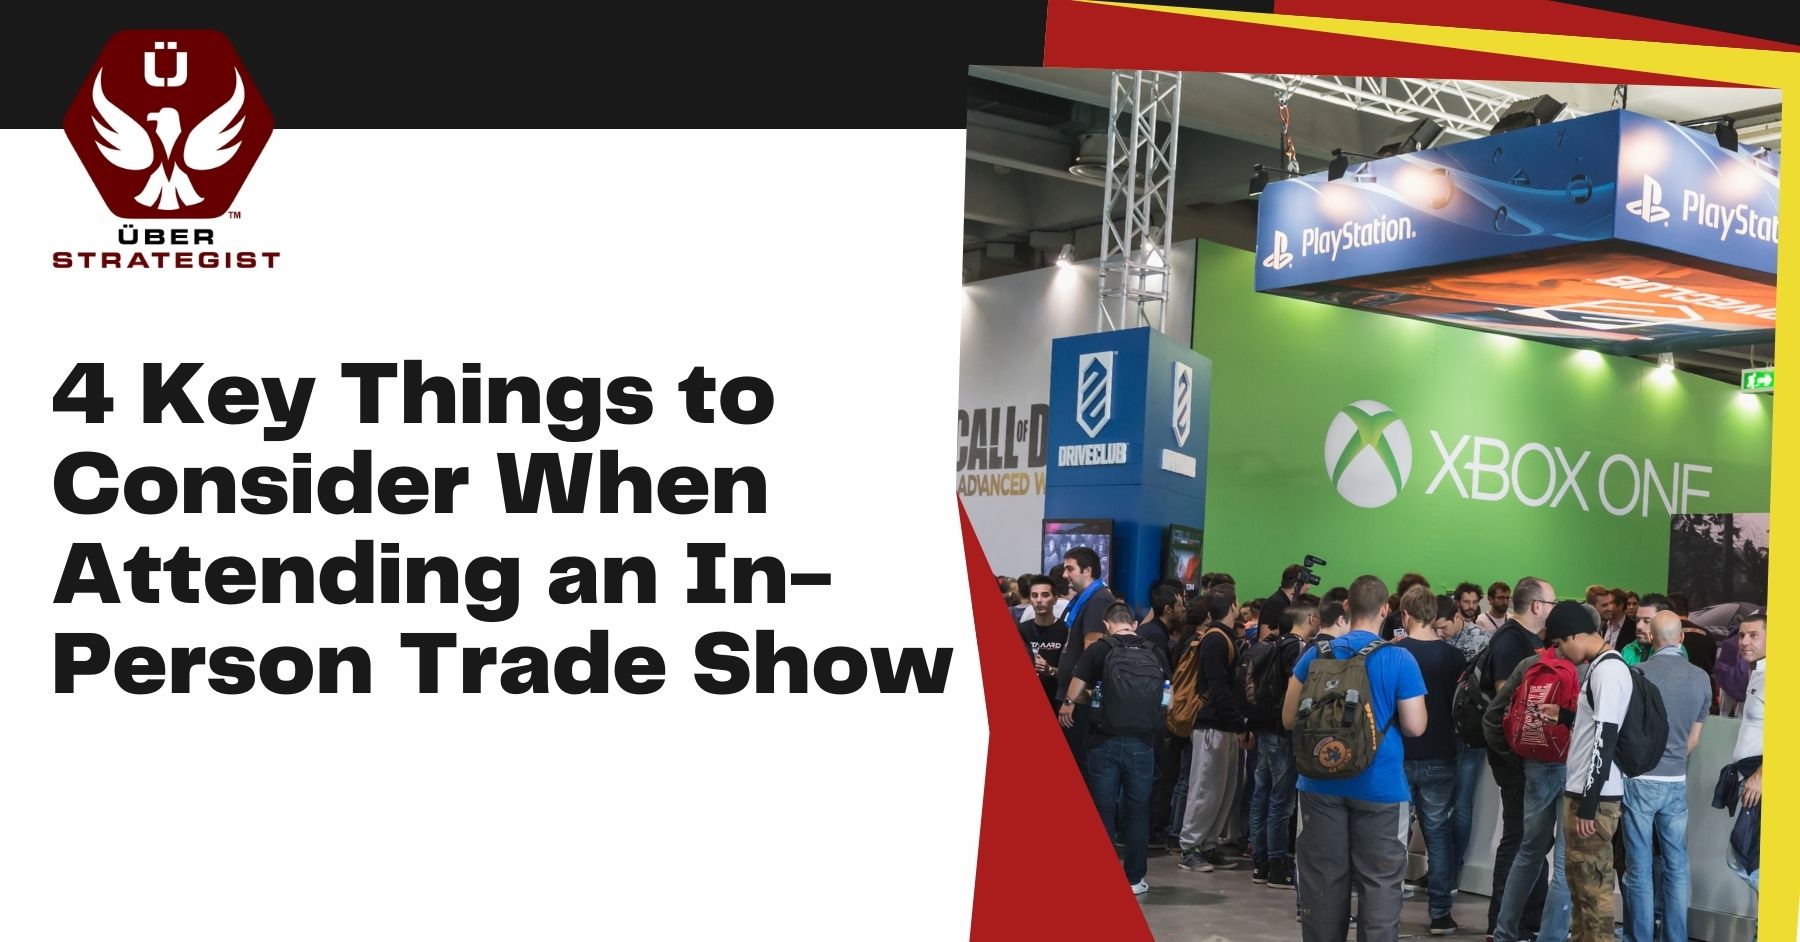 4 Key Things to Consider When Attending an In-Person Trade Show - UberStrategist Blog